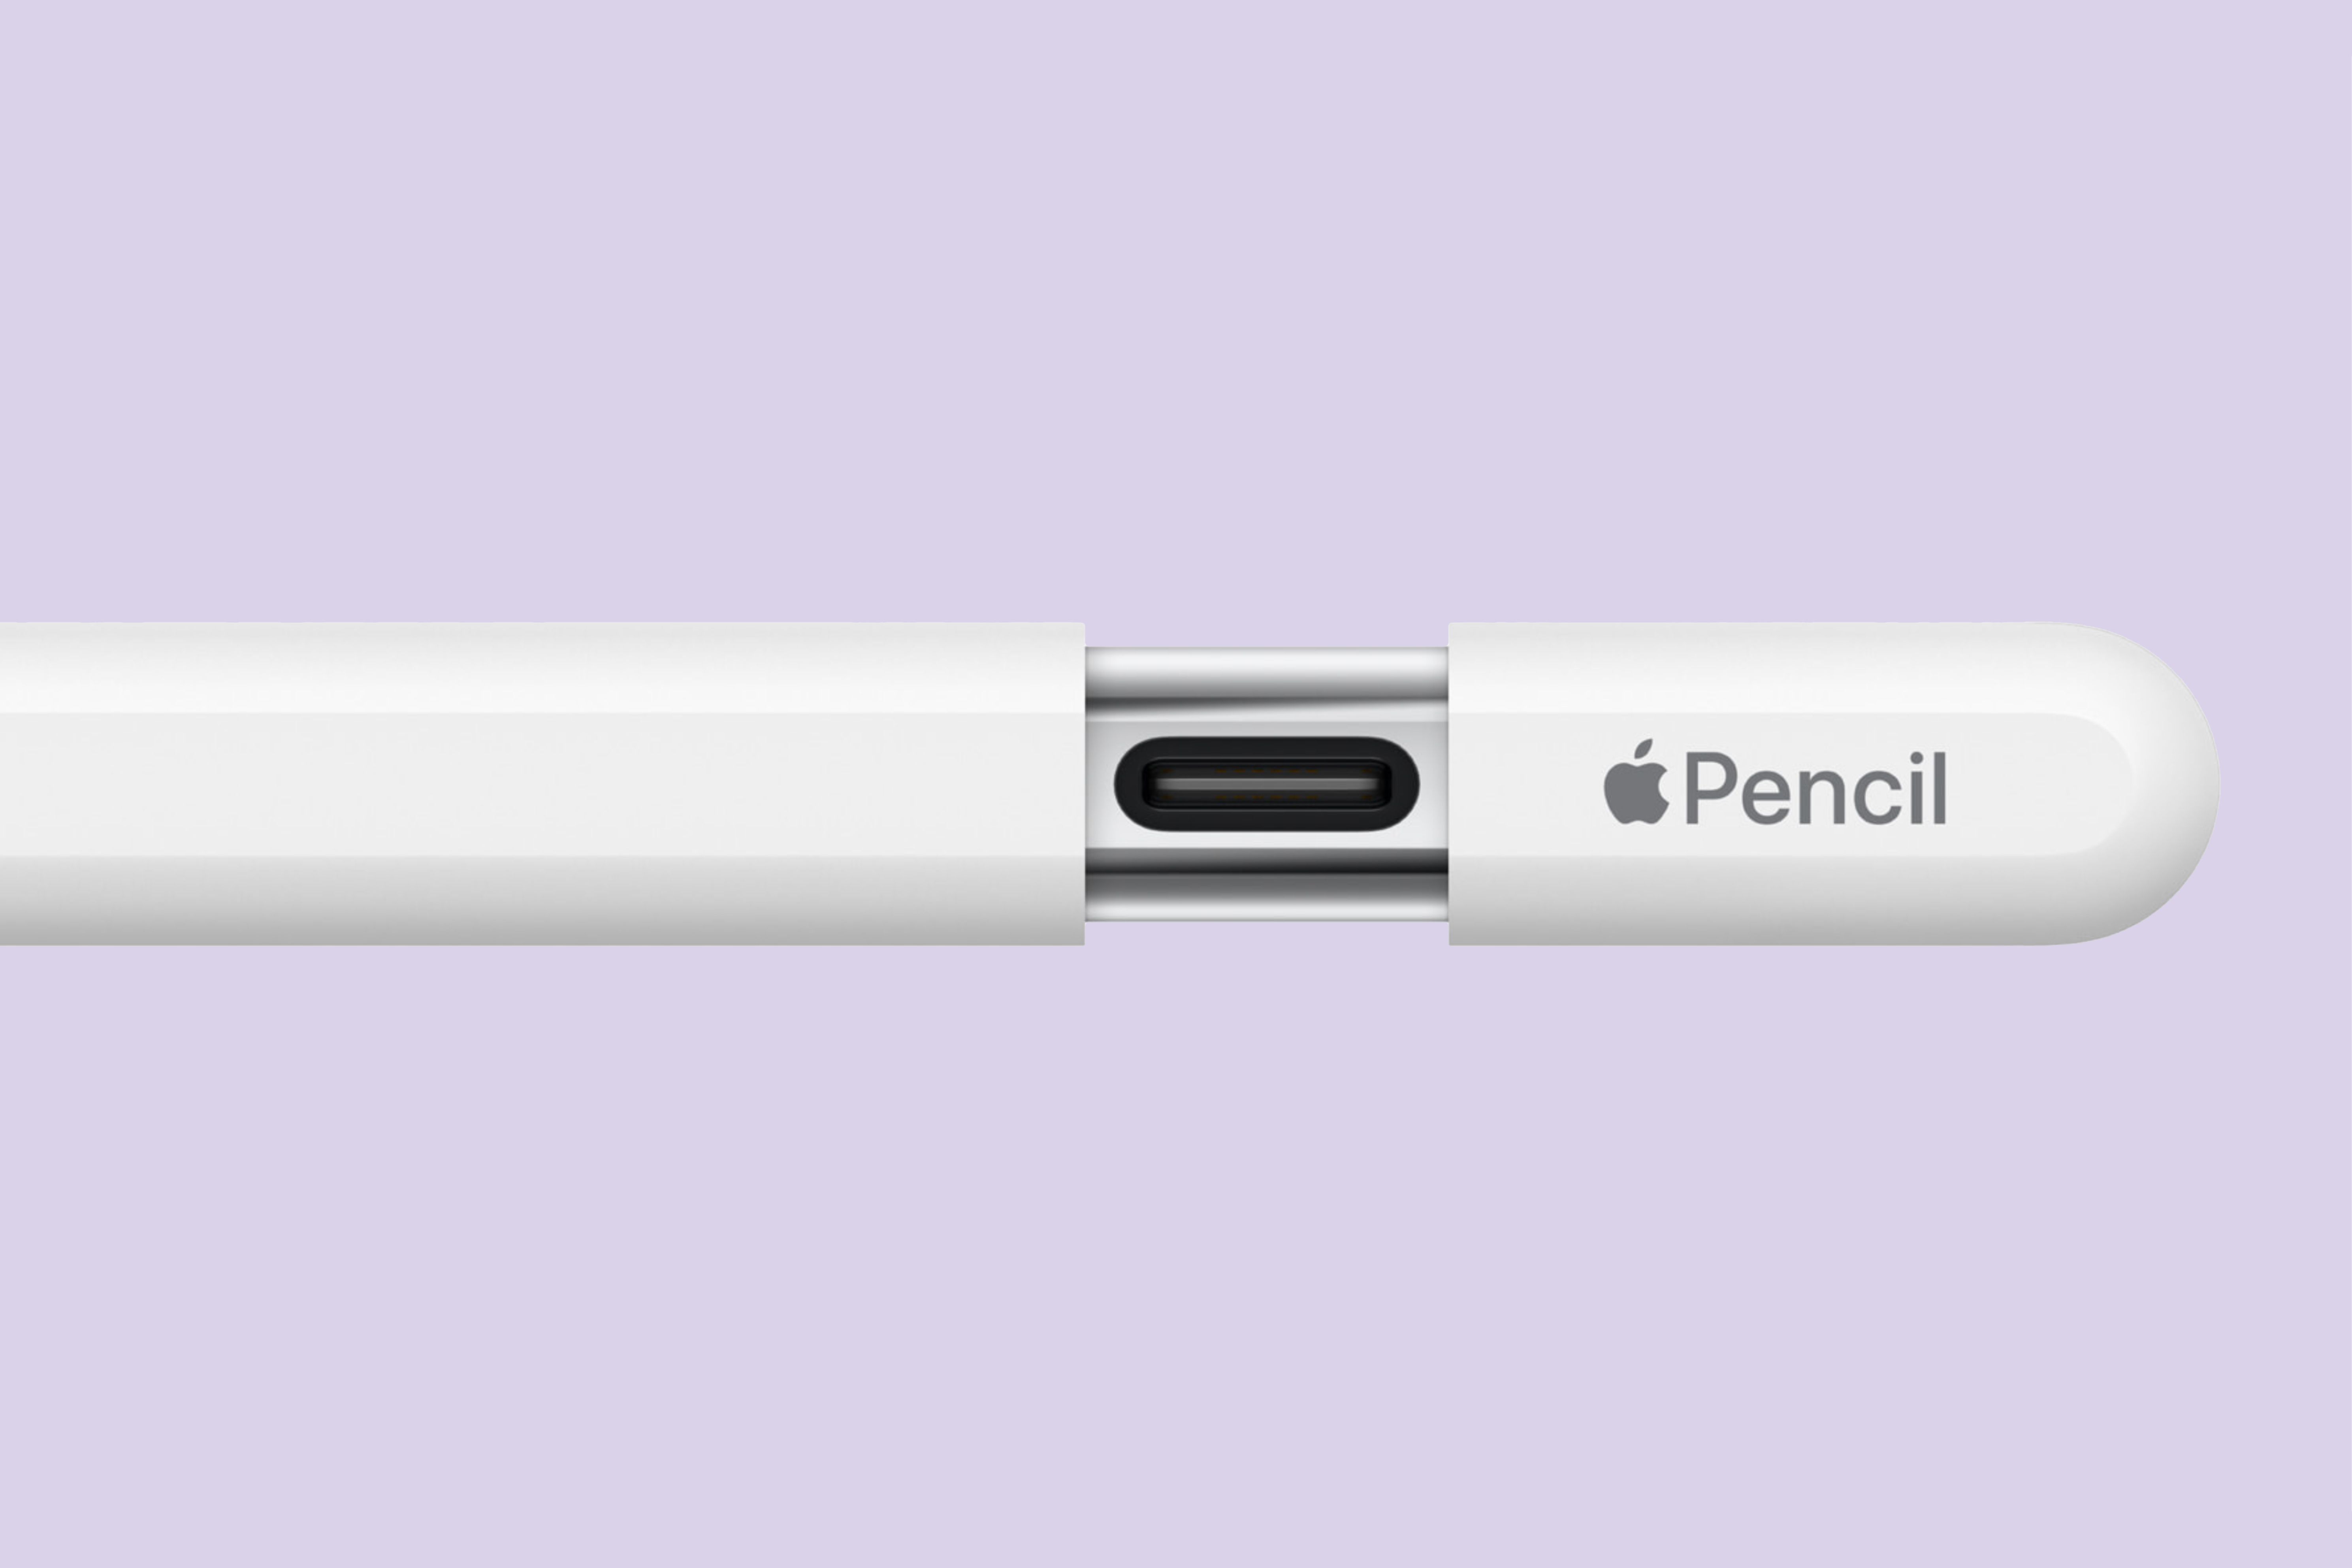 The sliding cover and USB-C port on the USB-C Apple Pencil.